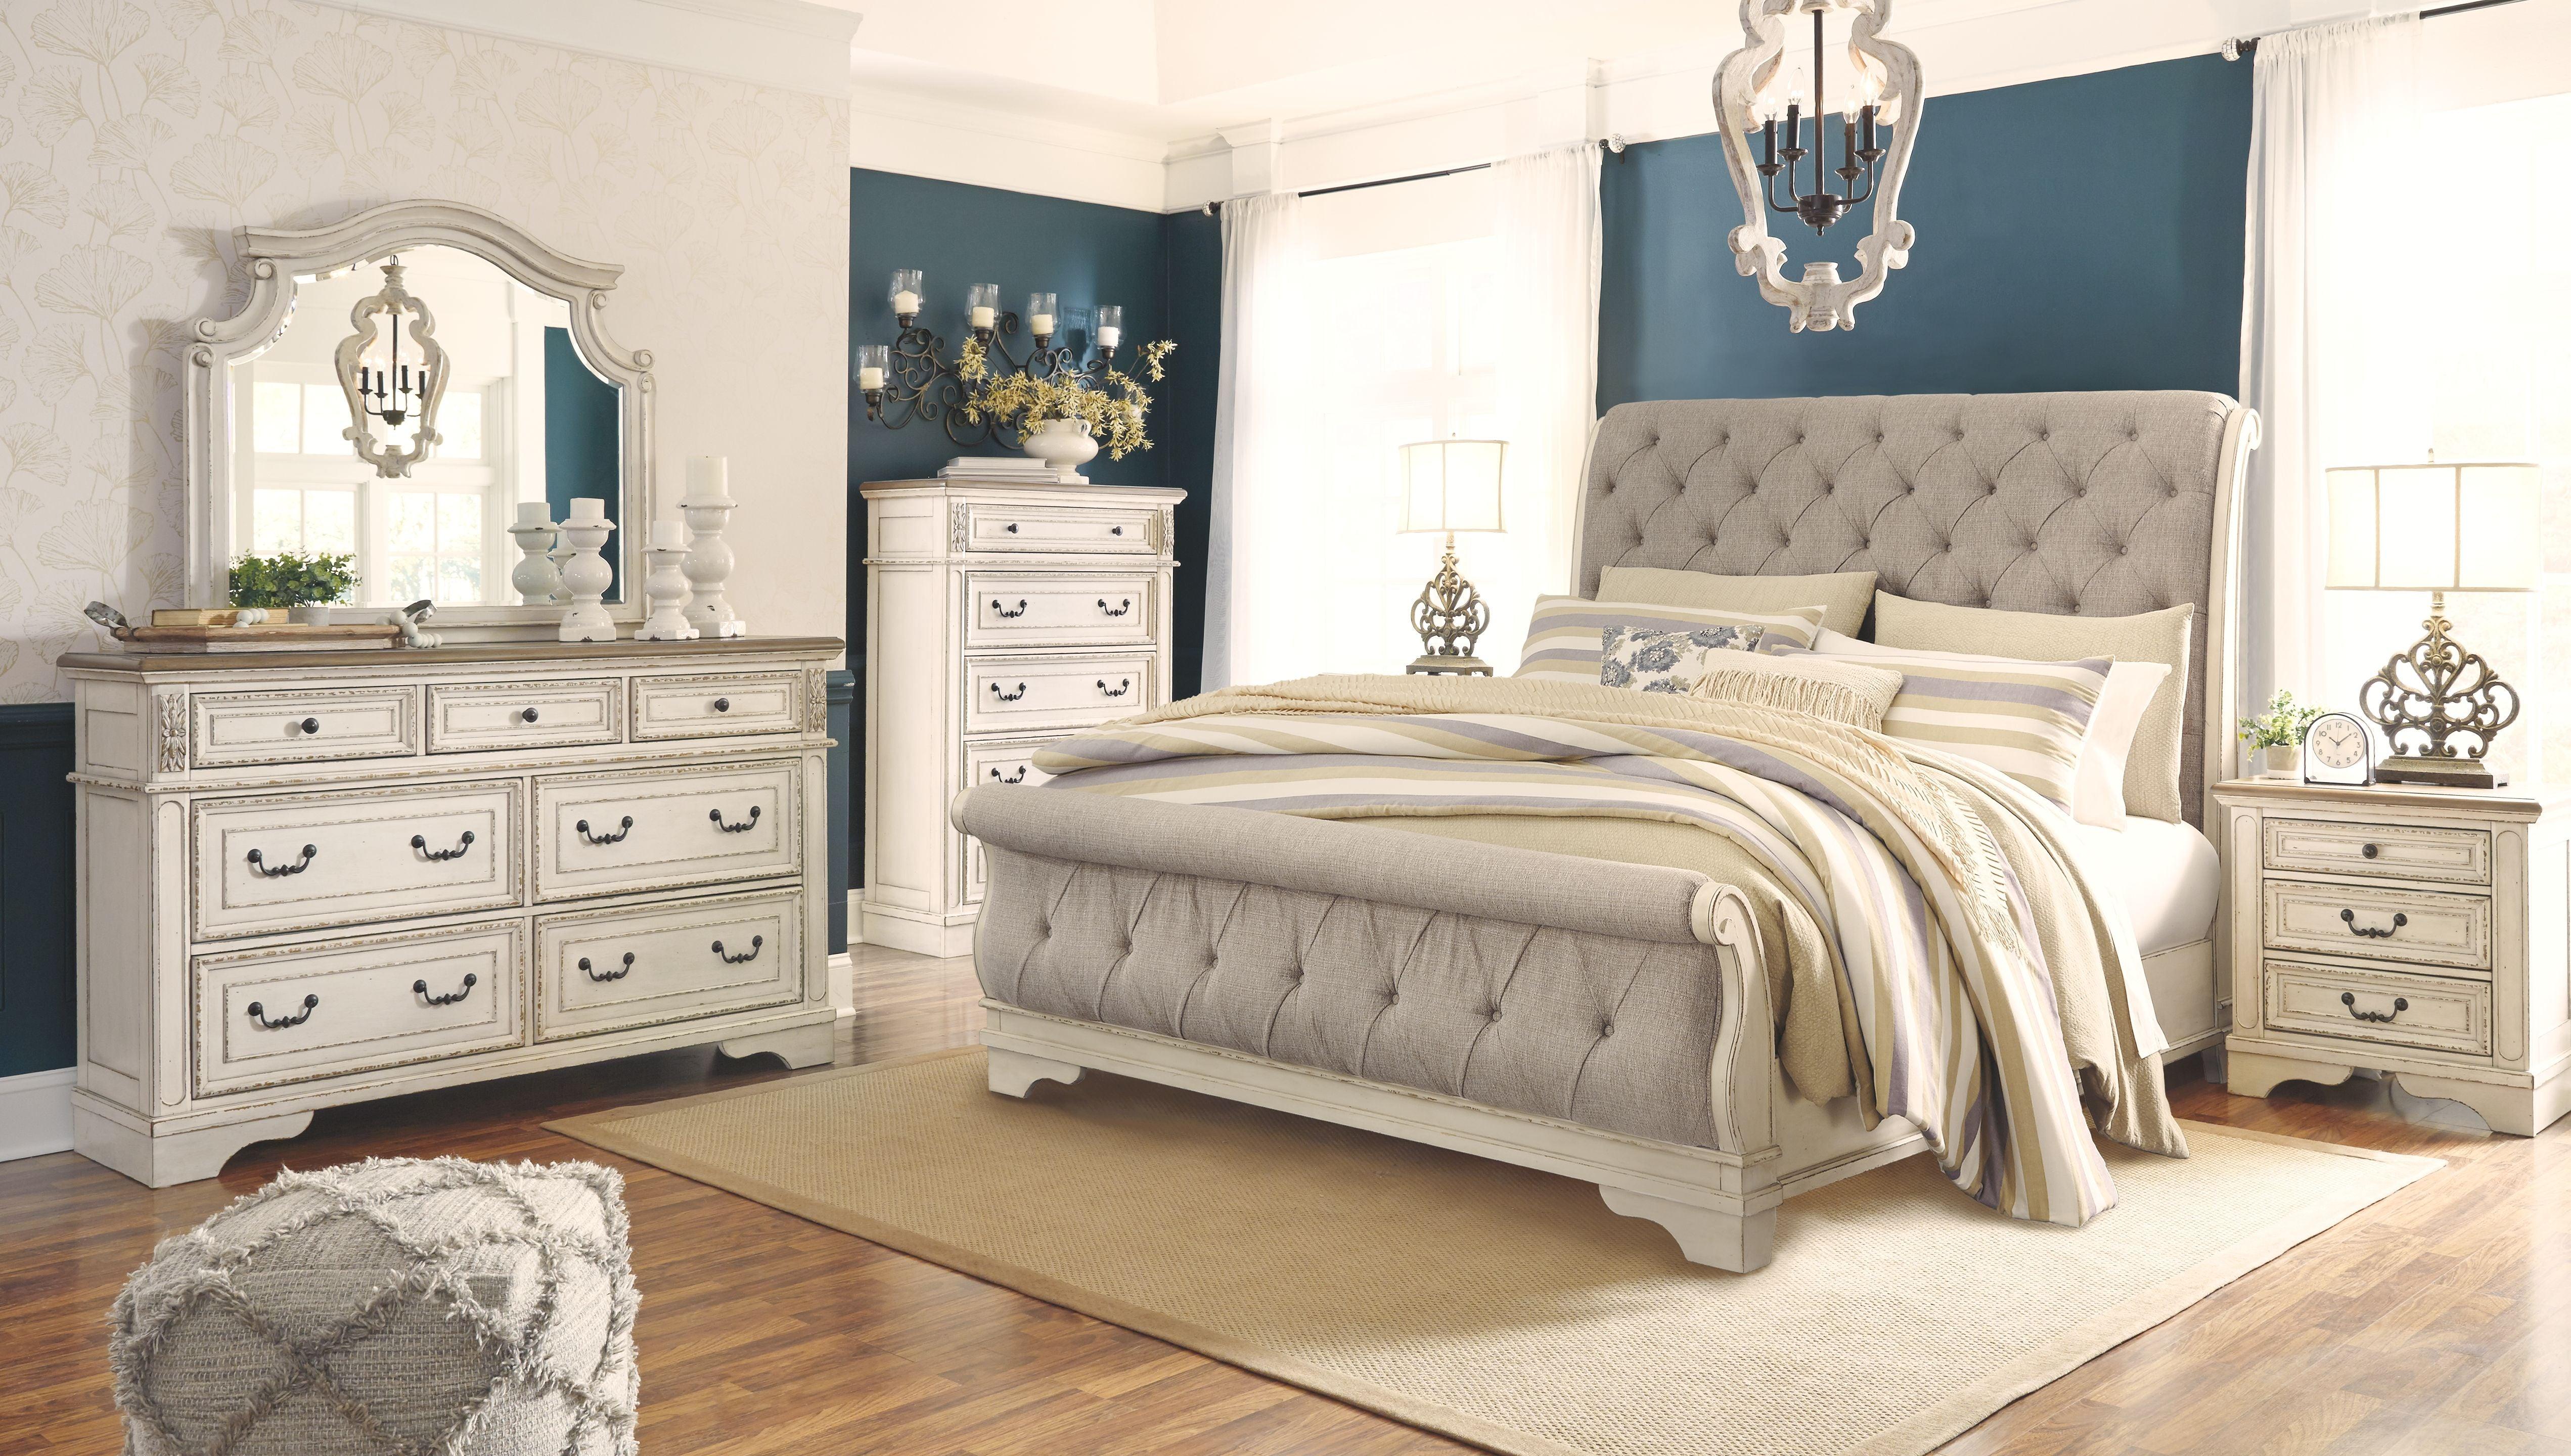 Signature Design by Ashley® - Realyn - Bedroom Sleigh Bed Set - 5th Avenue Furniture